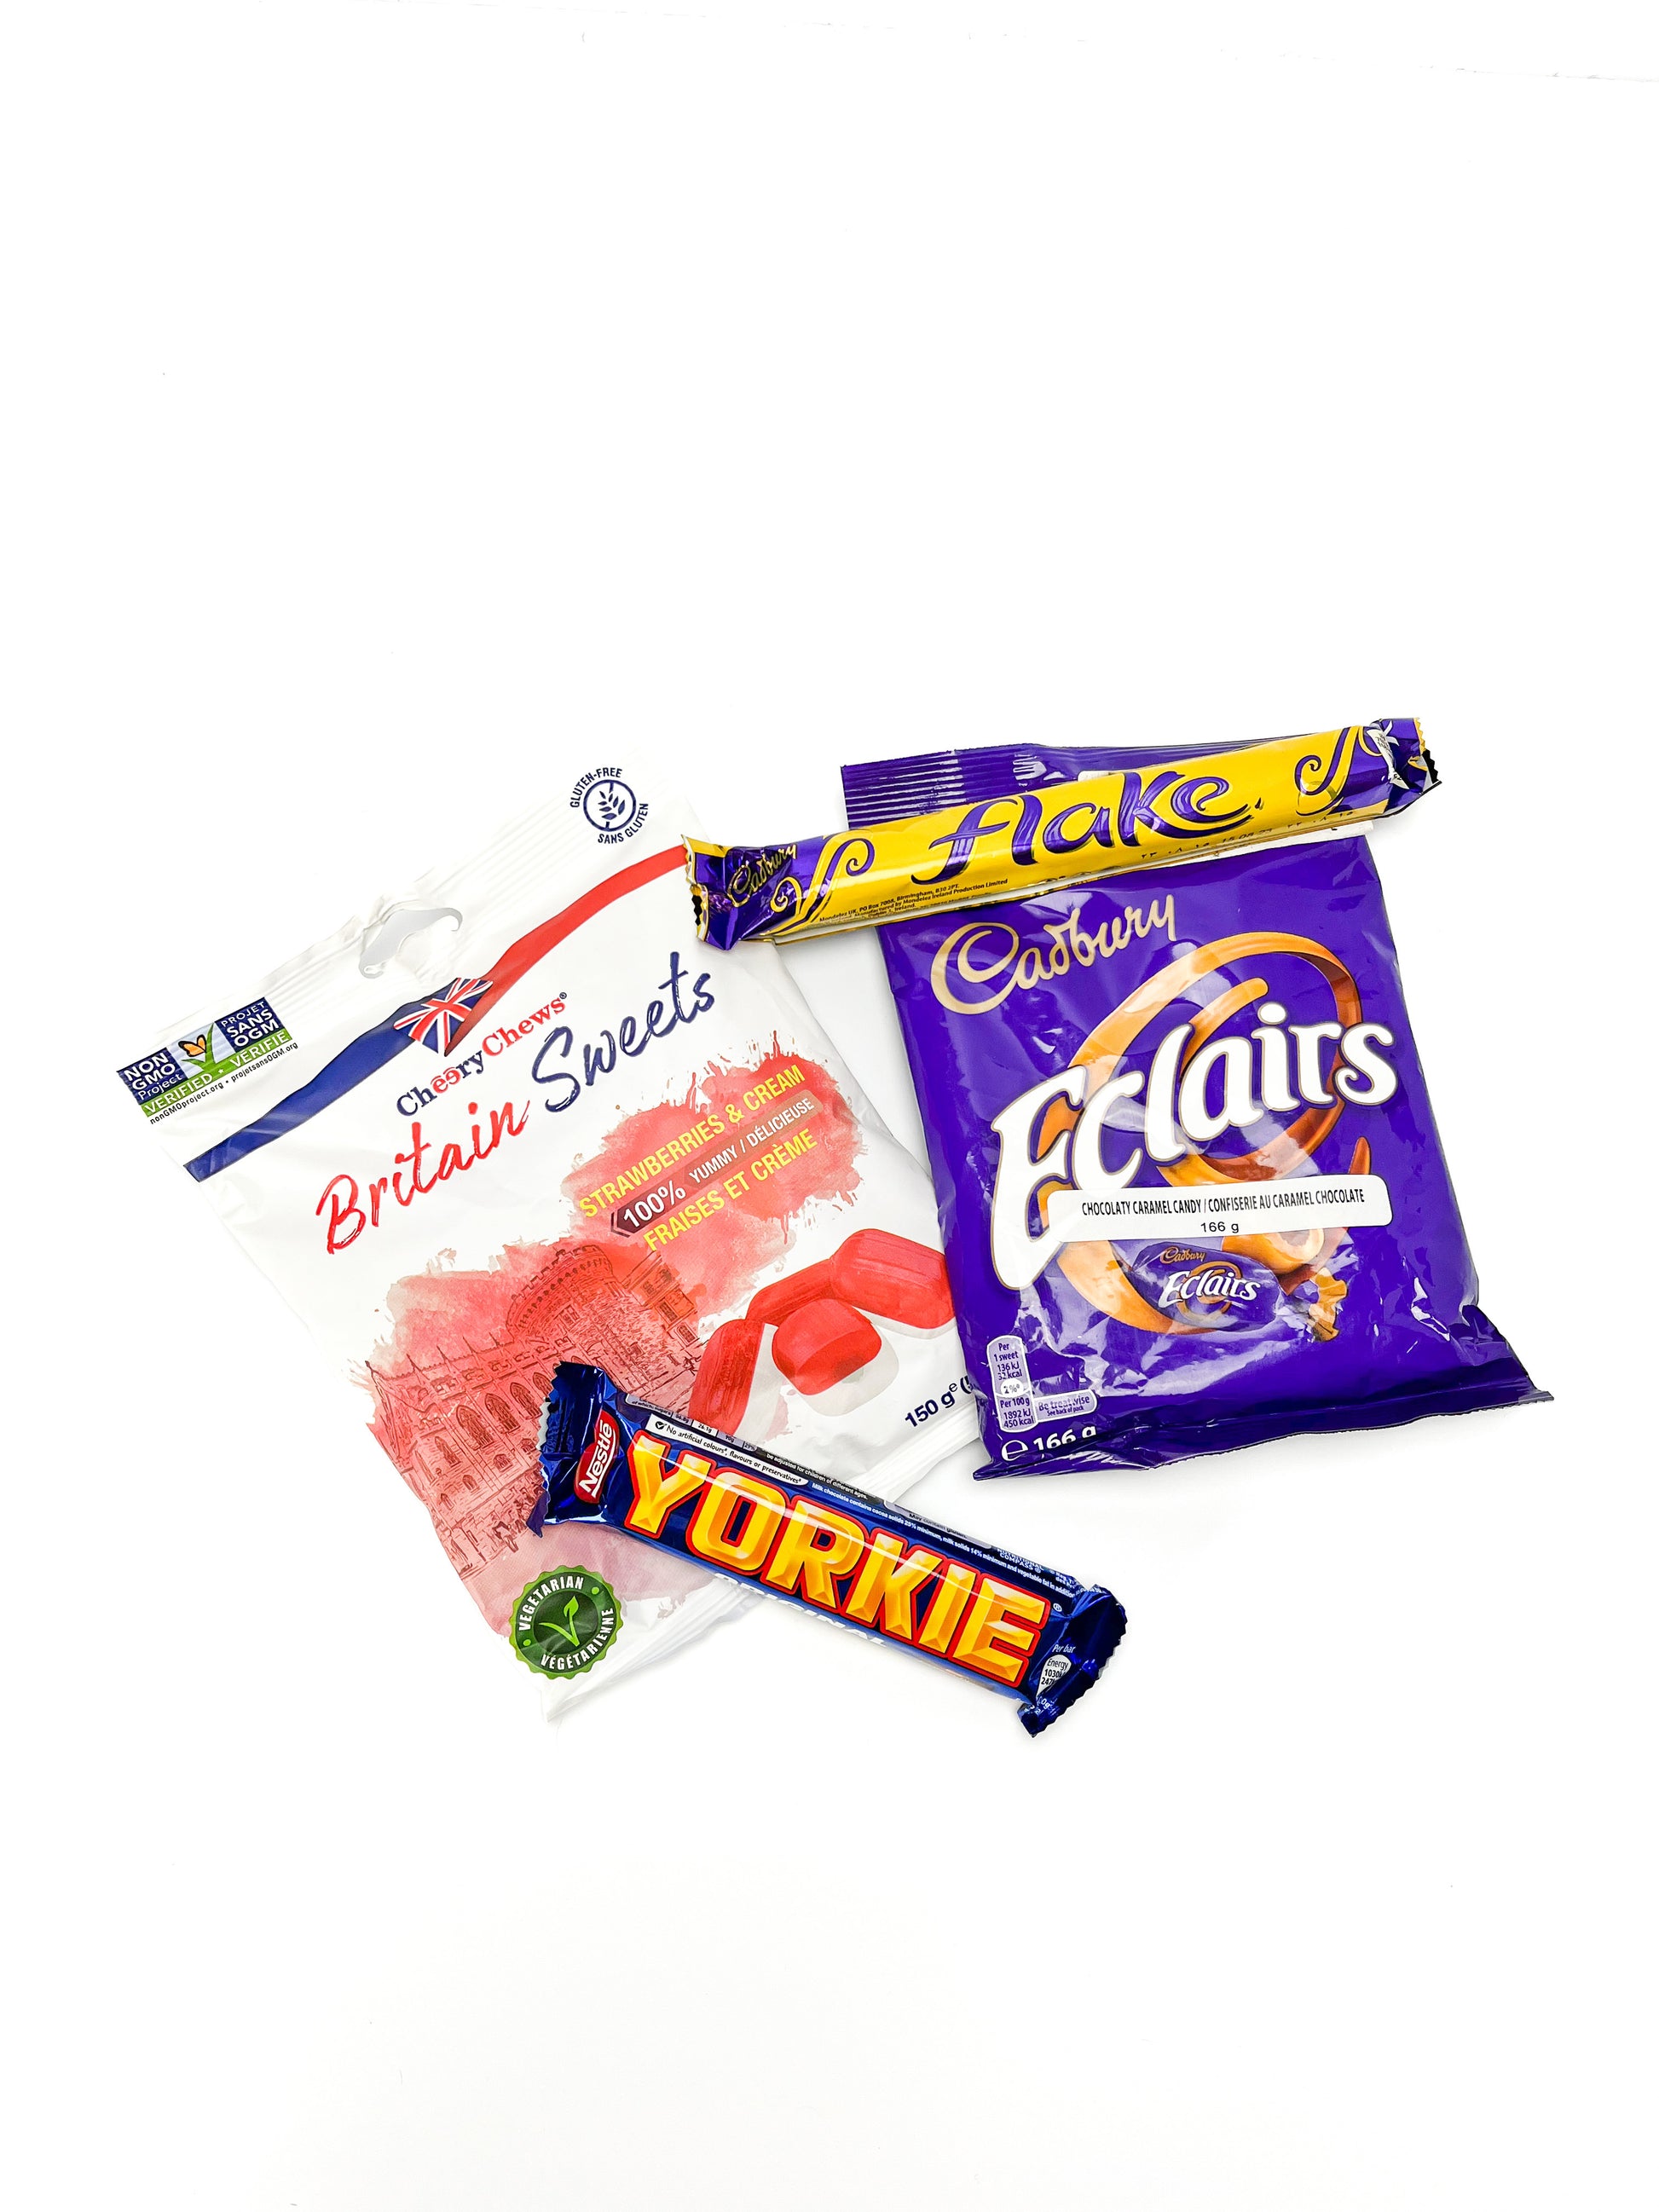 A package of britain sweets, cadbury eclaires, flake chocolate bar, and a yorkie bar displayed on a white background.